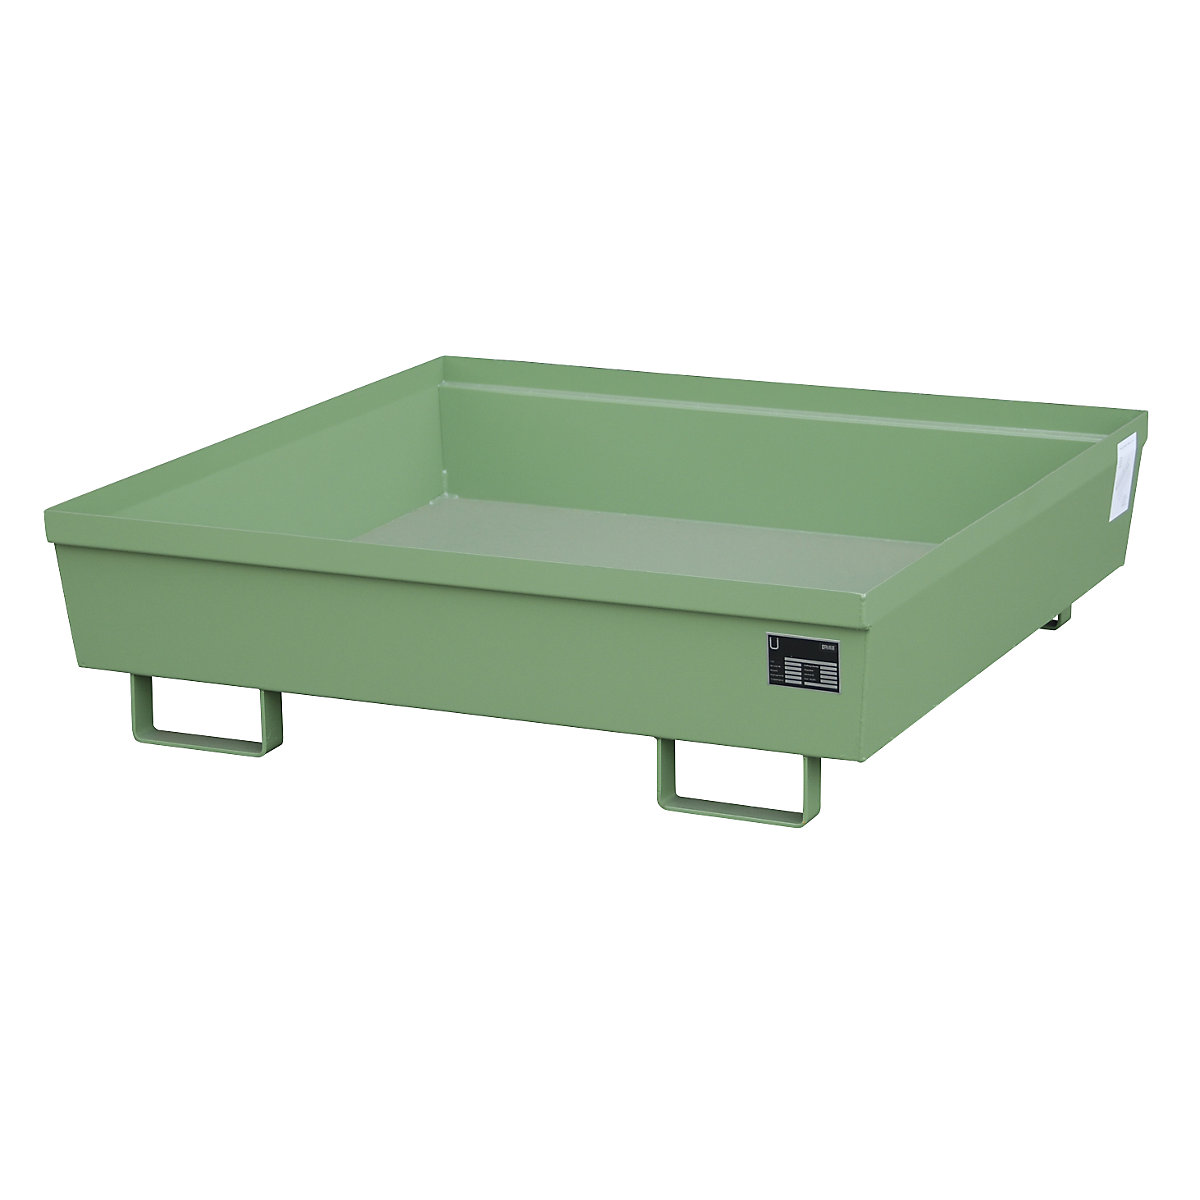 Steel sump tray with edge profiles – eurokraft pro, LxWxH 1200 x 1200 x 335 mm, without grate, green RAL 6011-5